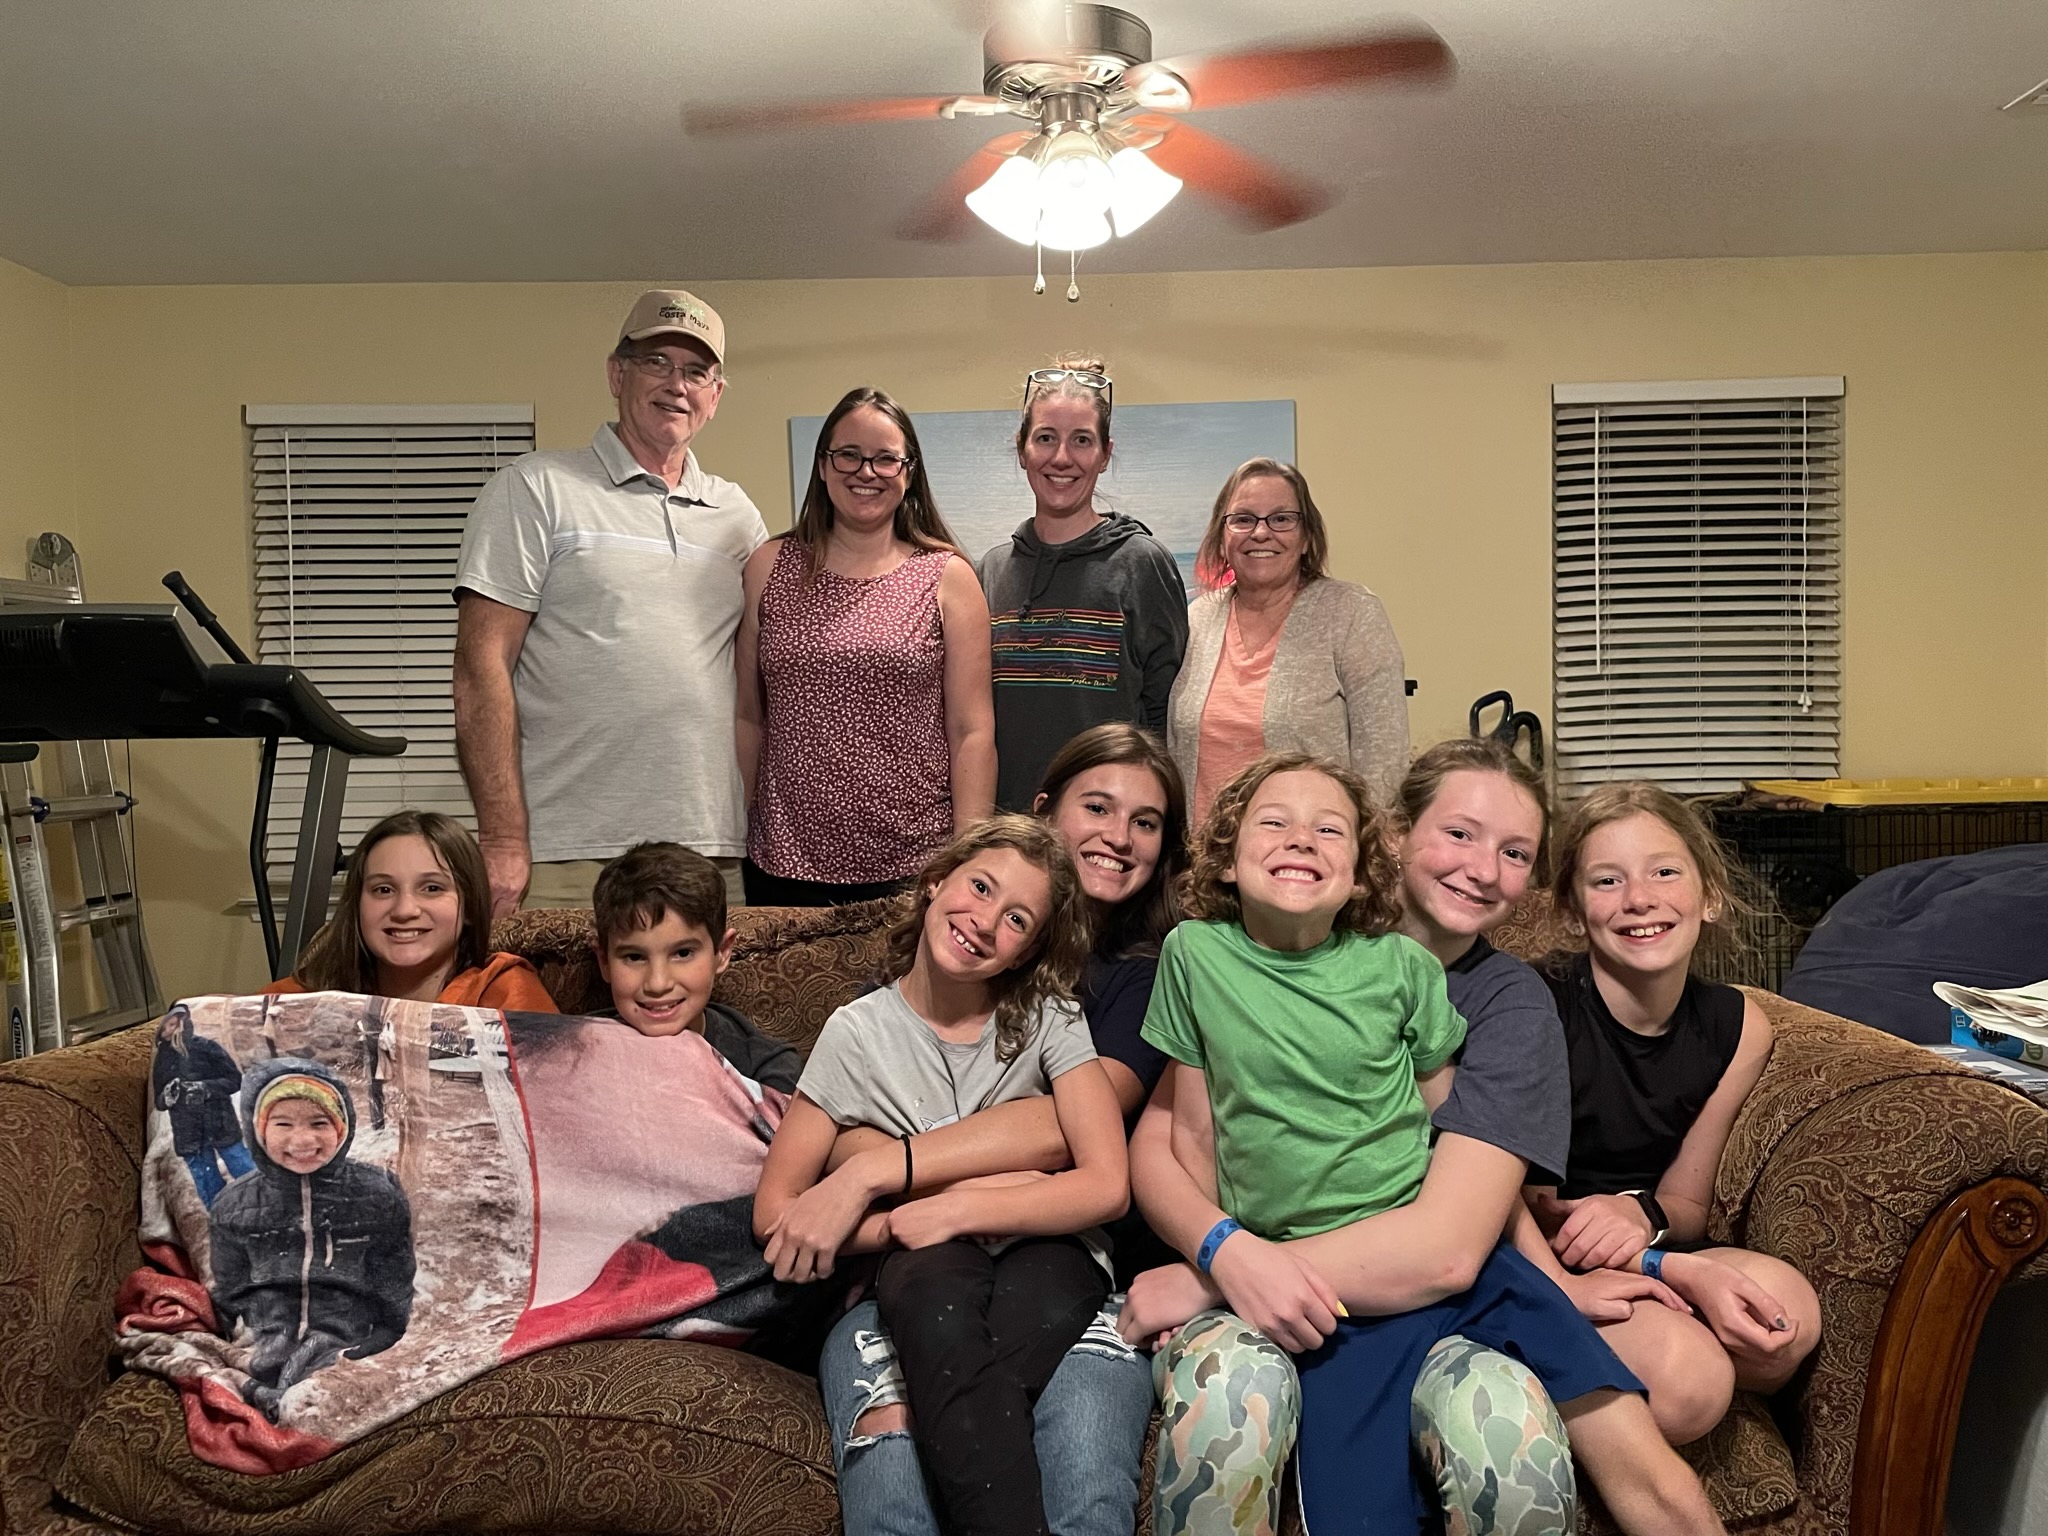 A photo of Uncle Ken, Kim, Kelsey, Aunt Karen, Niala, Riker, Ainsley, Kahlan, Grayson, Rayleigh, and Dillon with the kids on a couch and the adults standing at Kim's house